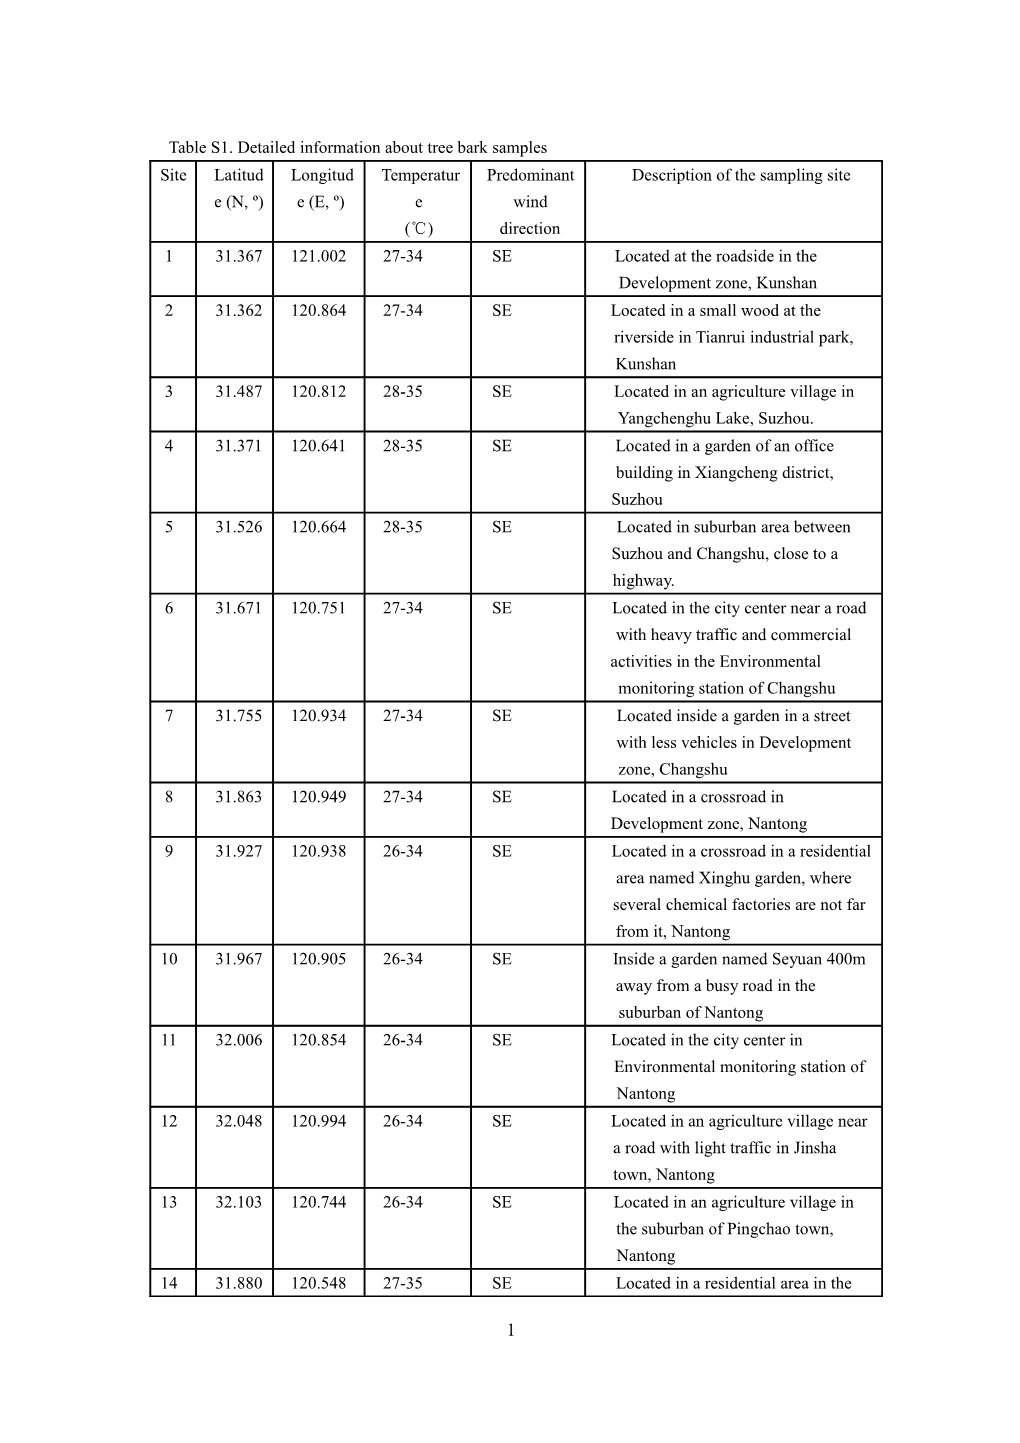 Table S1. Detailed Information About Tree Bark Samples